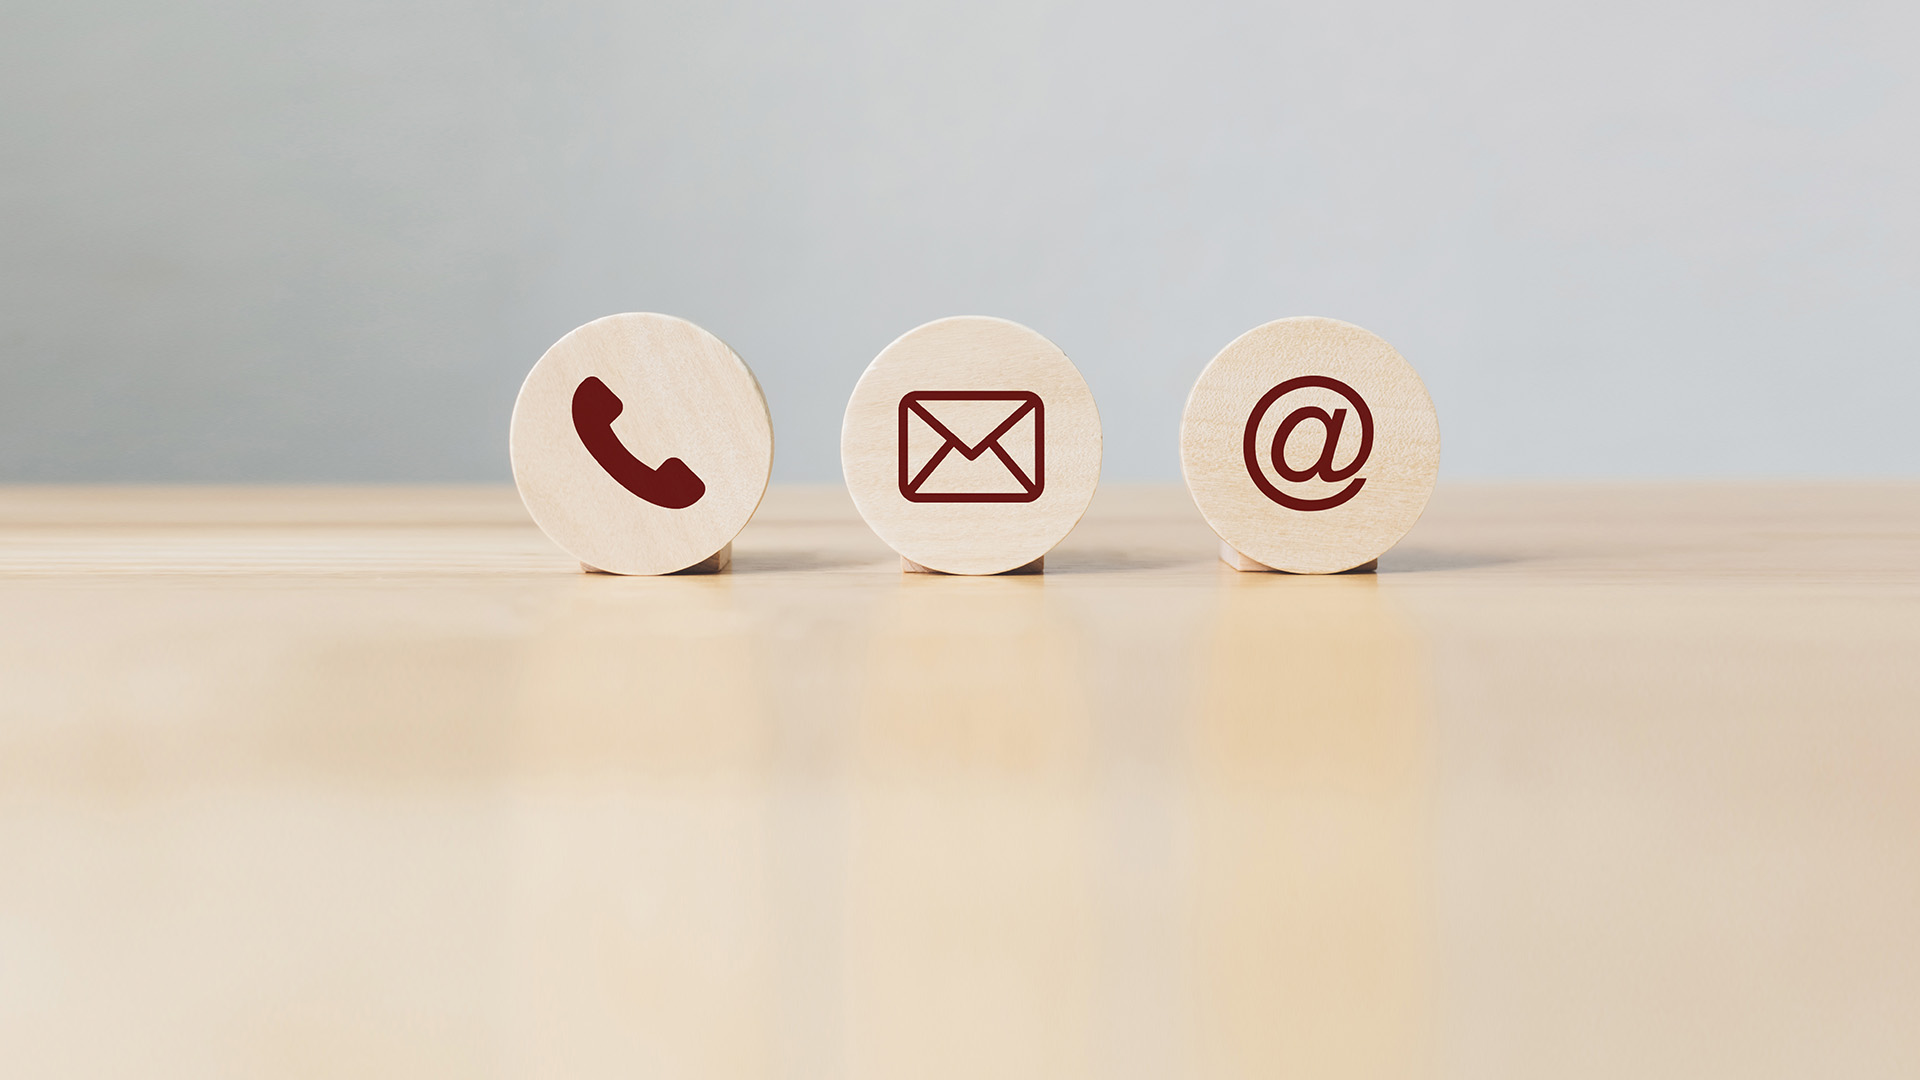 The image displays three small, square wooden signs on a light-colored surface with a blurred background. Each sign has a different symbol  the first has an envelope icon, the second is a telephone handset, and the third depicts a computer mouse cursor.